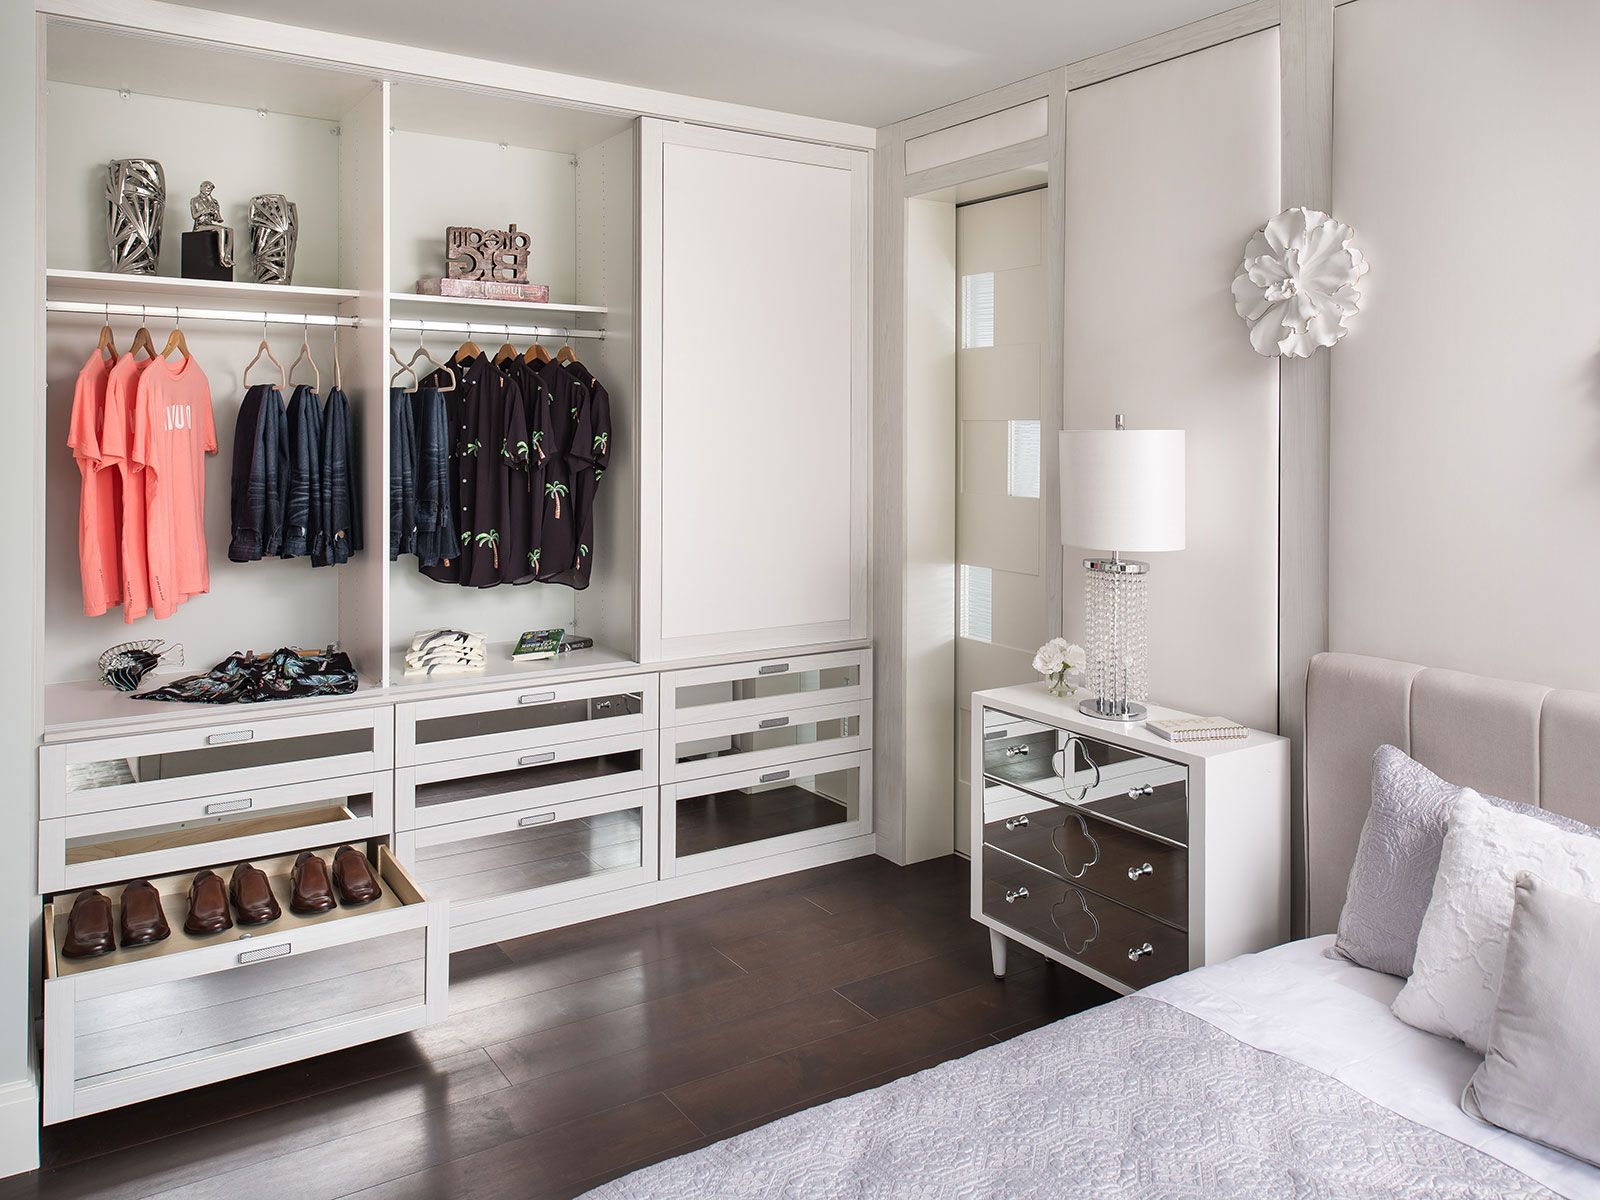 Wardrobe Closets | Design And Planning Ideas | Closet Factory Within Bedroom Wardrobes (View 15 of 20)